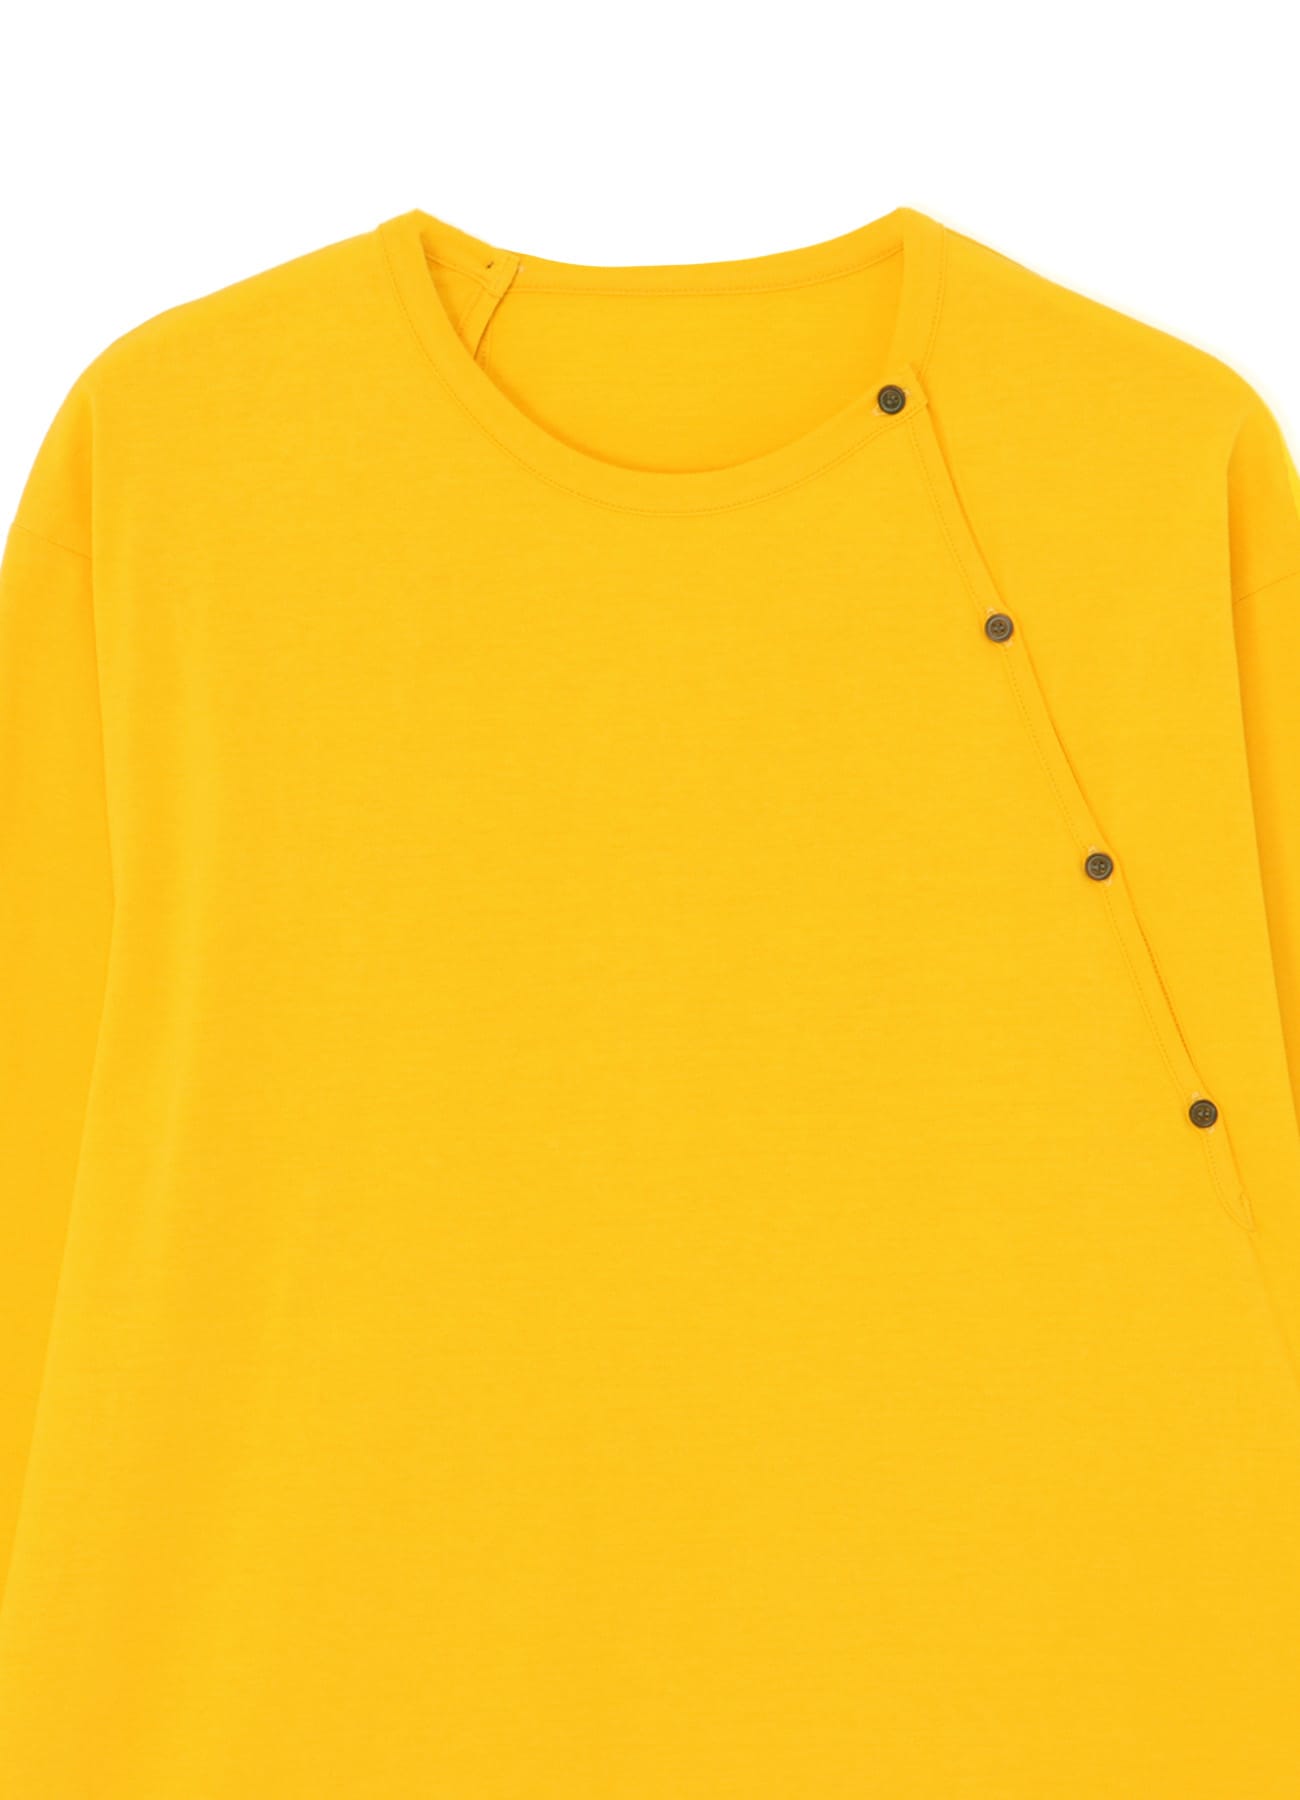 LONG SLEEVE T-SHIRT WITH BUTTON-UP DIAGONAL SLITS